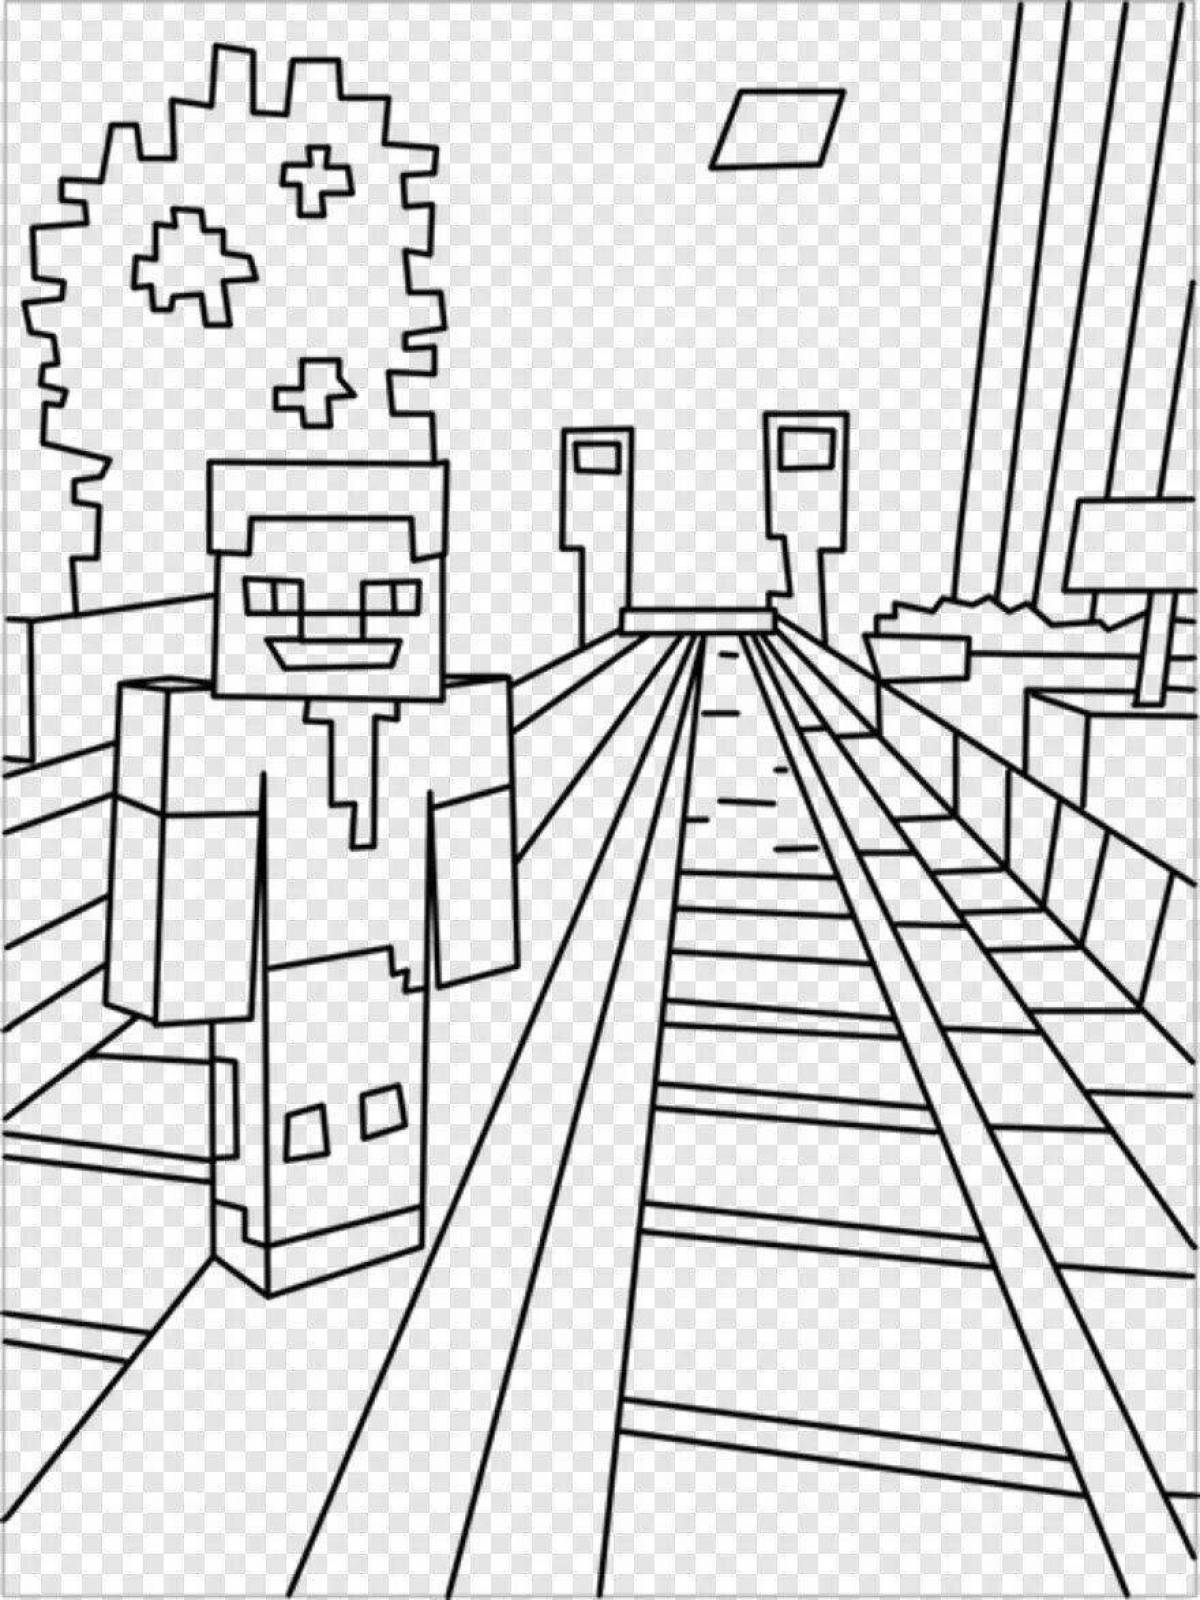 Colorful minecraft villagers coloring pages